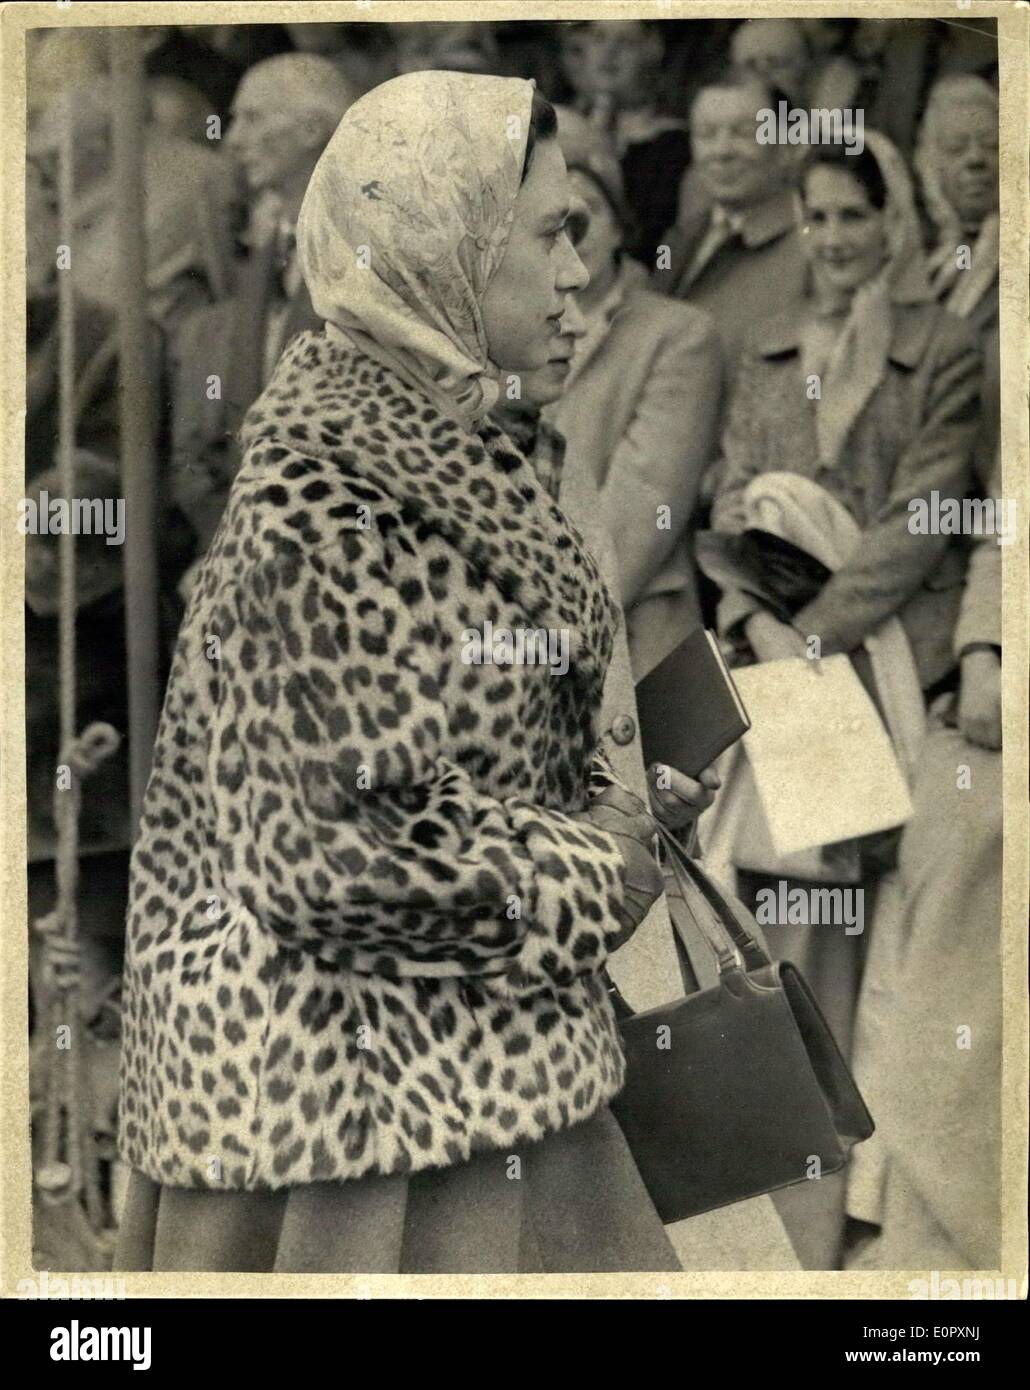 Apr. 27, 1957 - Royals At Badminton Horse Trials.: Photo shows Princess Margaret, wore this leopard skin coat when she arrived to watch the final of the three day event - Show Jumping -during the Badminton Horse Trials today - the last day. Stock Photo